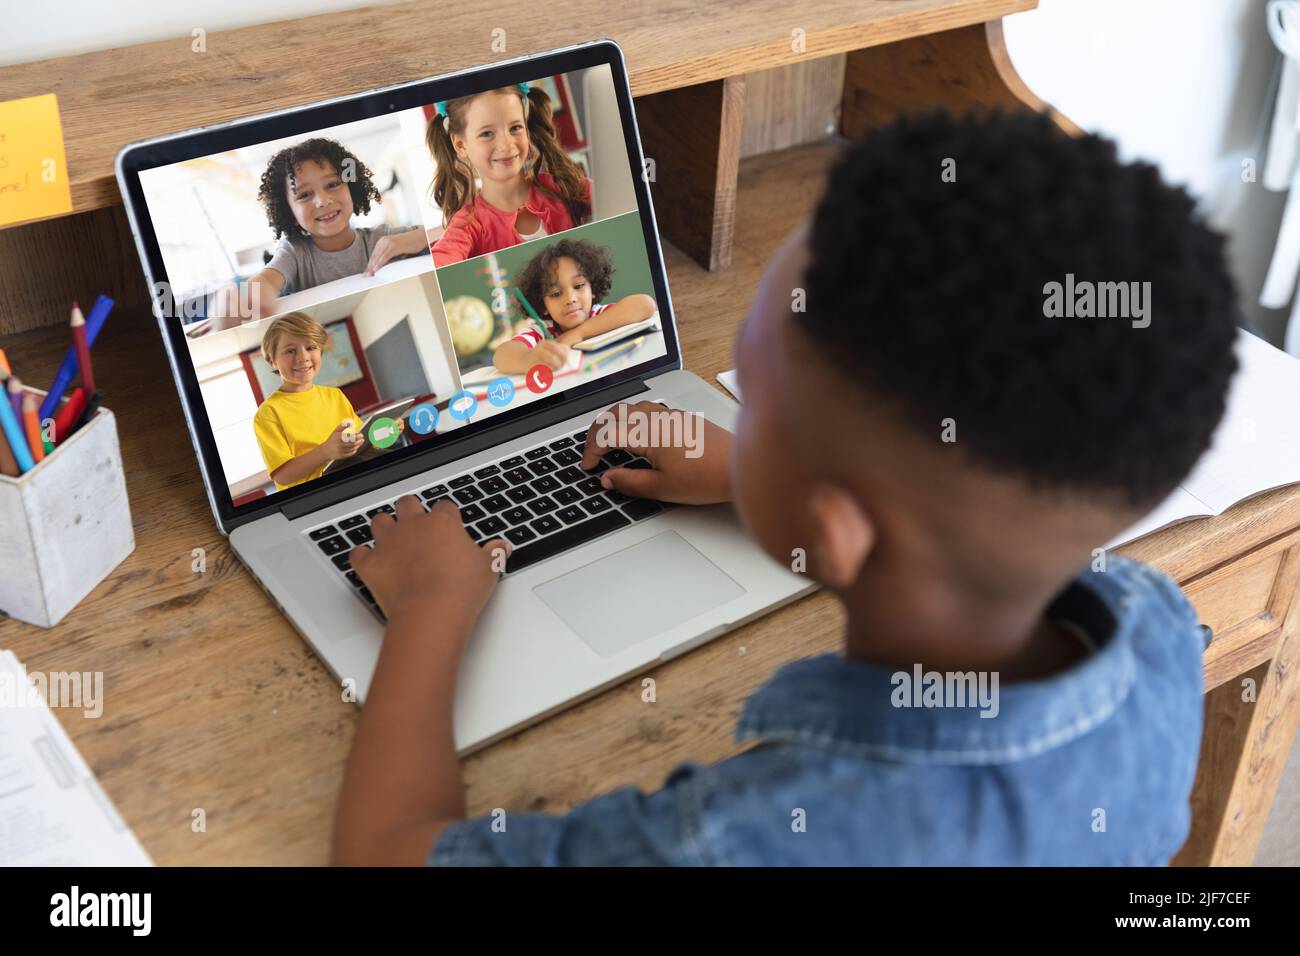 African american boy looking at laptop screen with multiracial students during online class Stock Photo